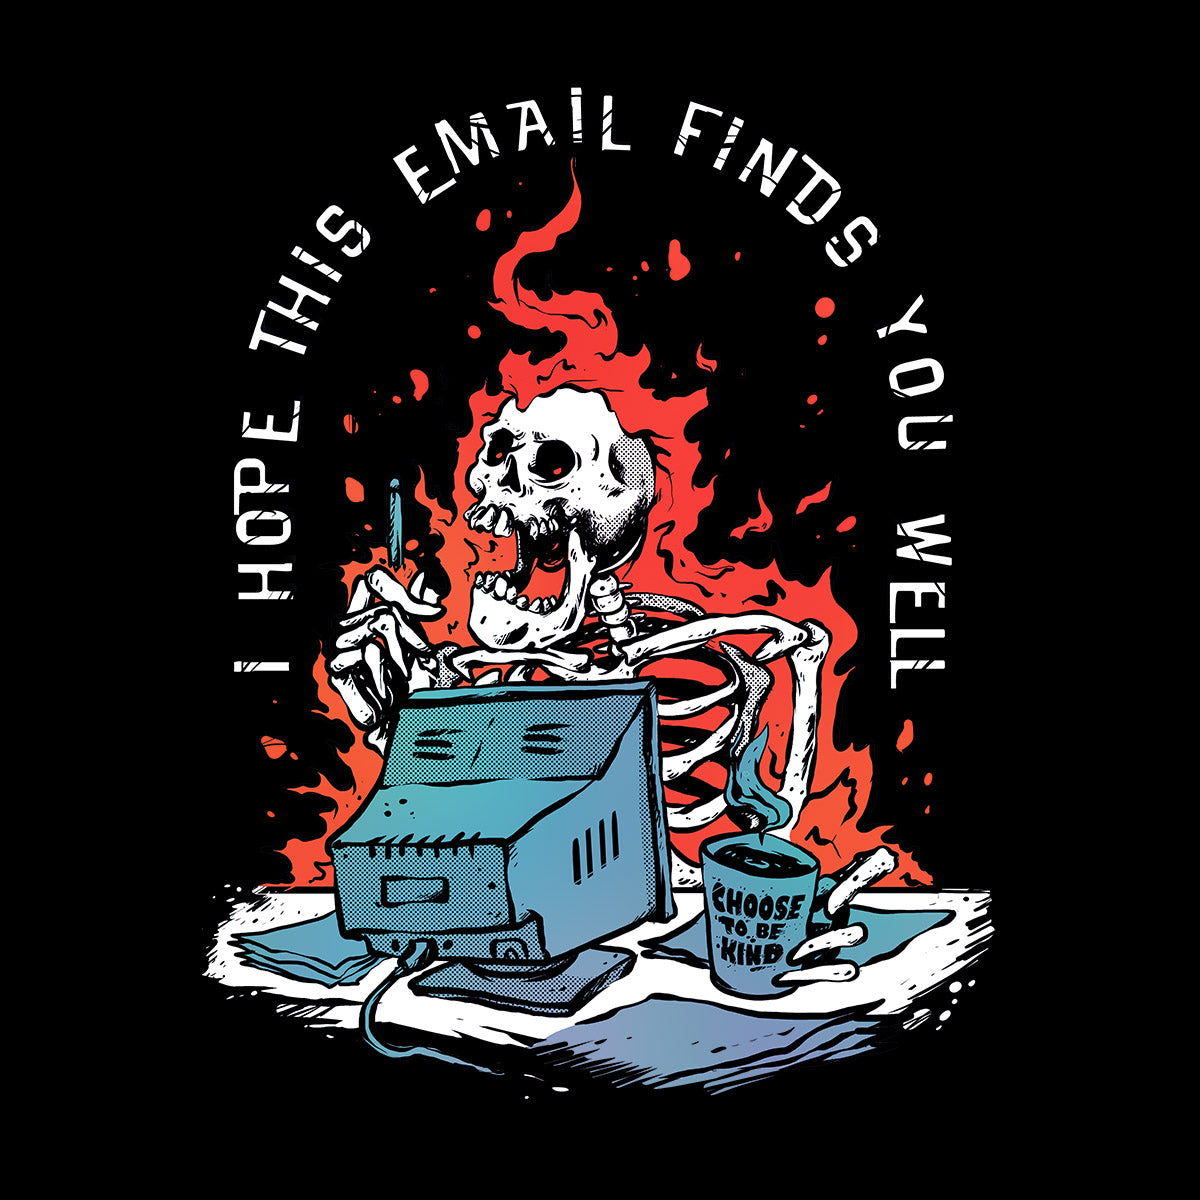 I hope this email finds you well Sarcastic Funny t-shirt